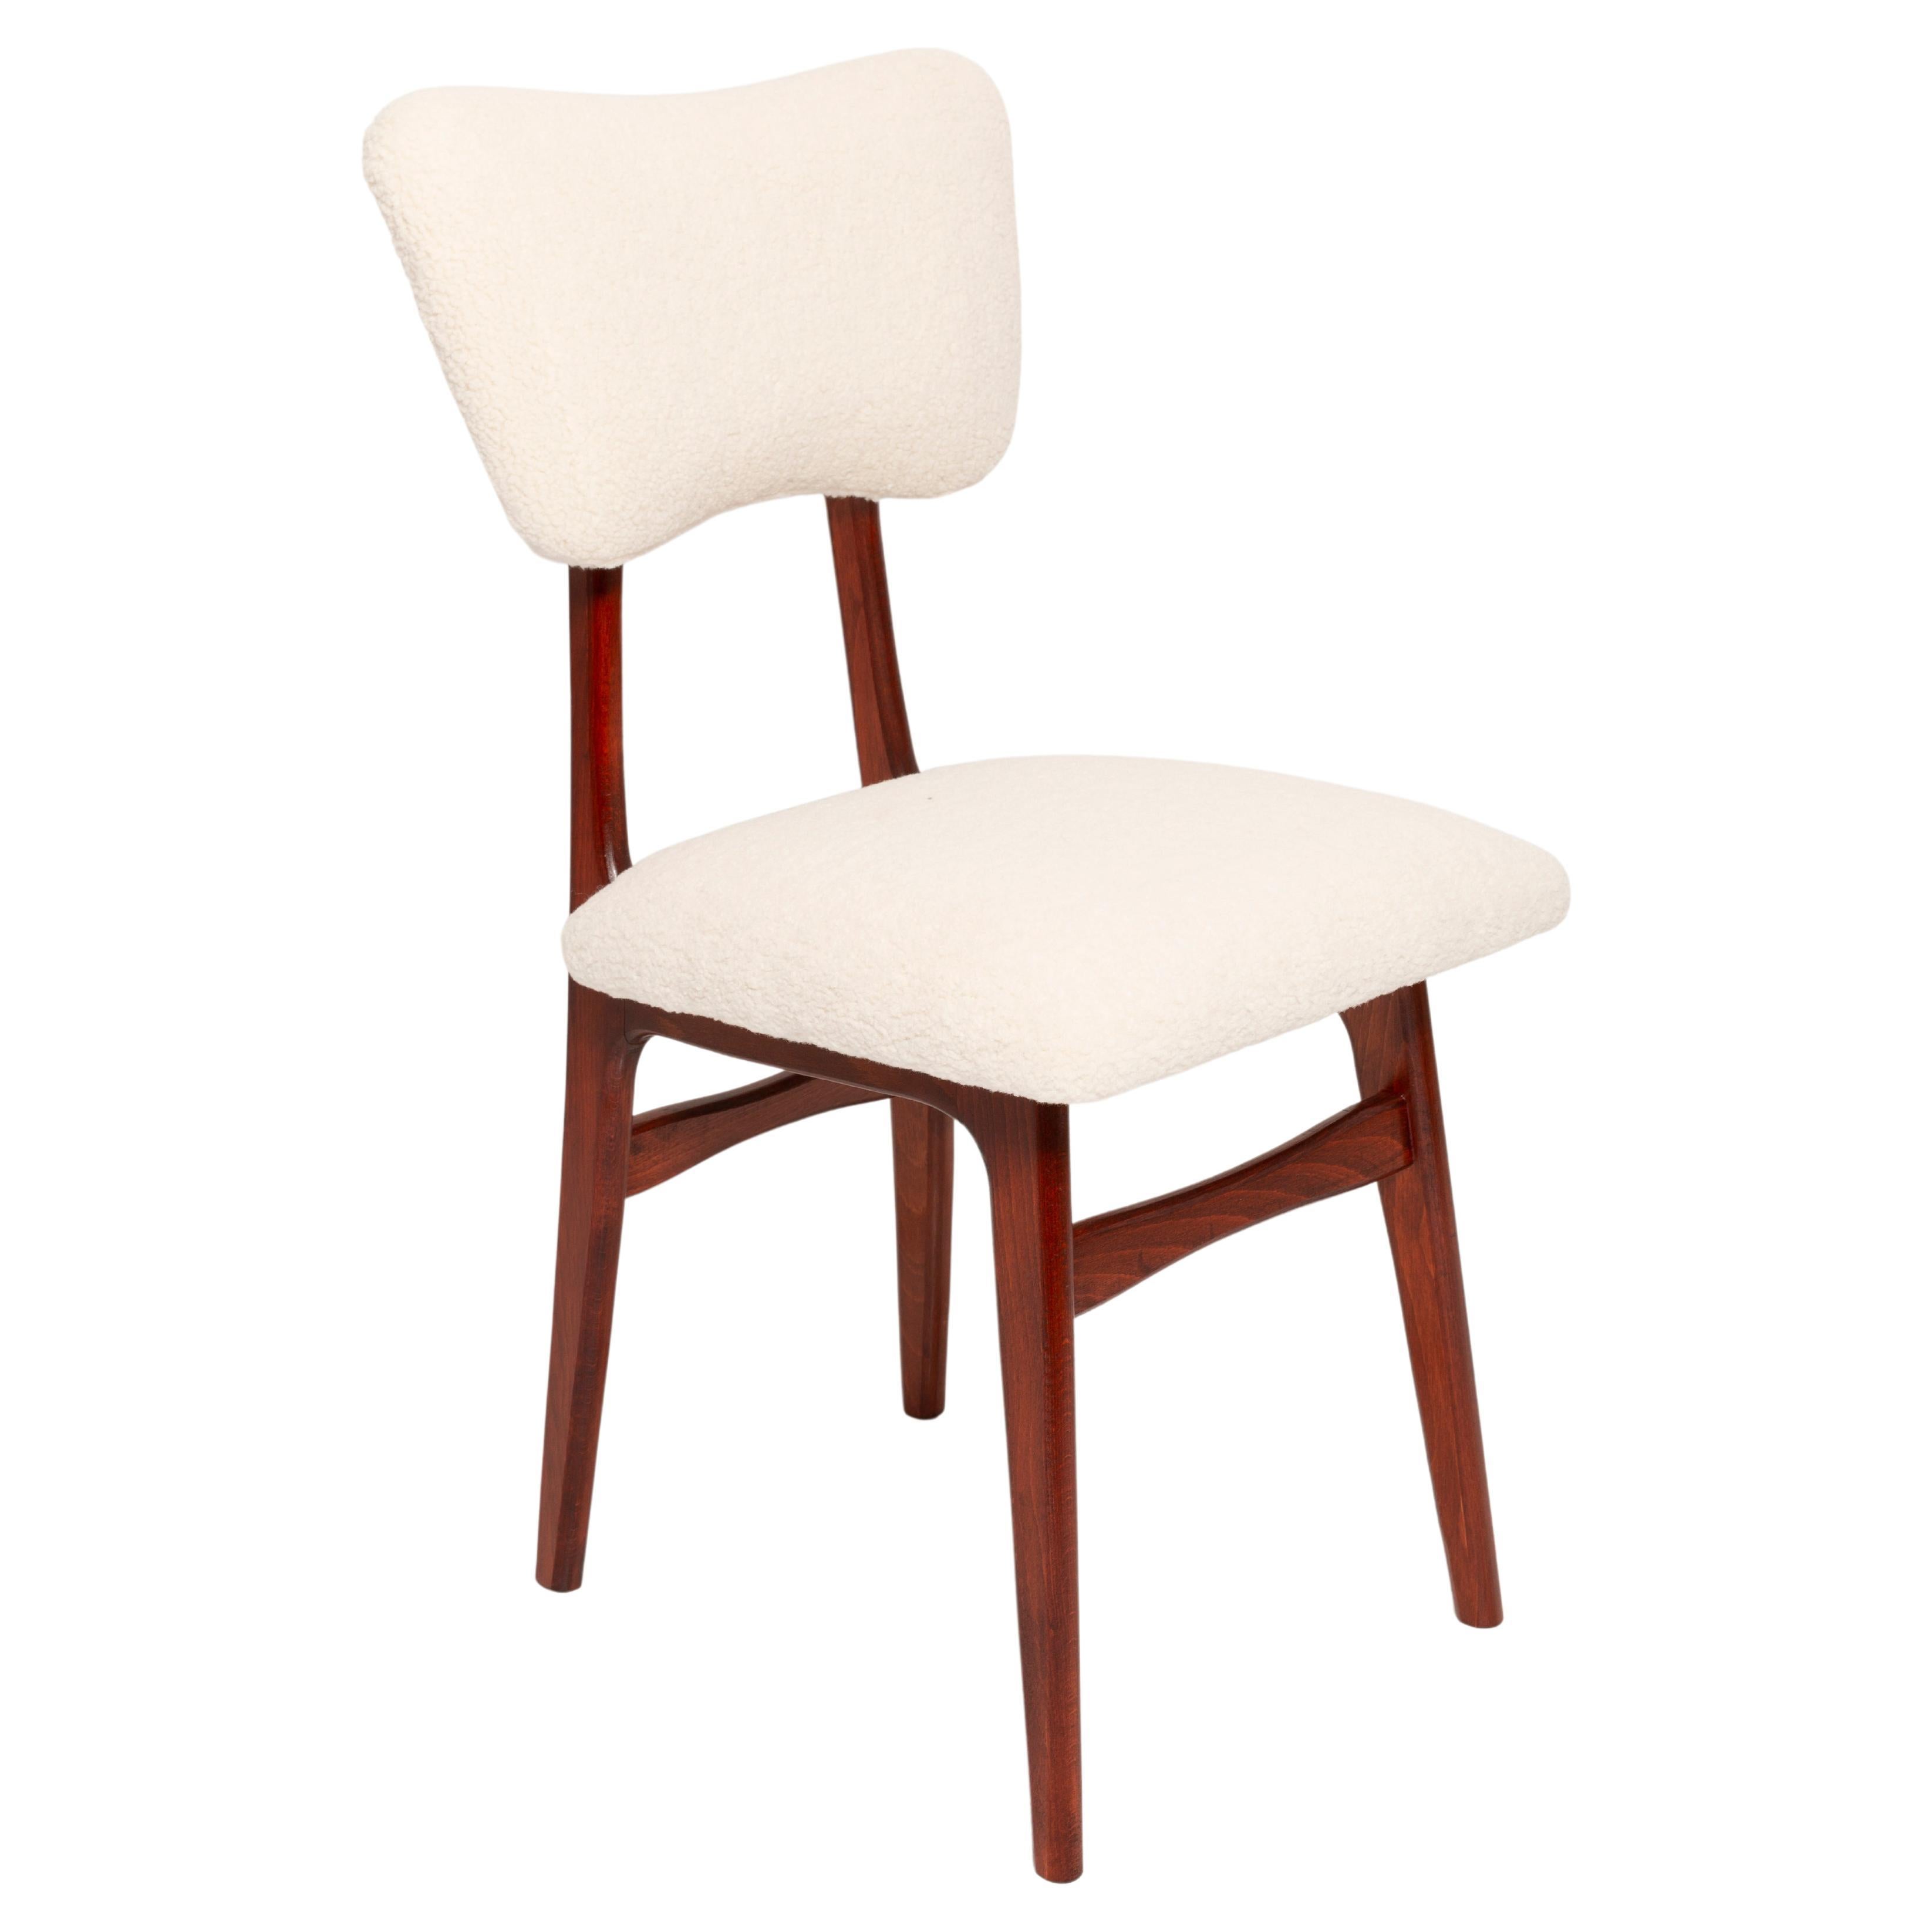 20th Century Light Crème Boucle Cherry Wood Chair, Europe, 1960 For Sale